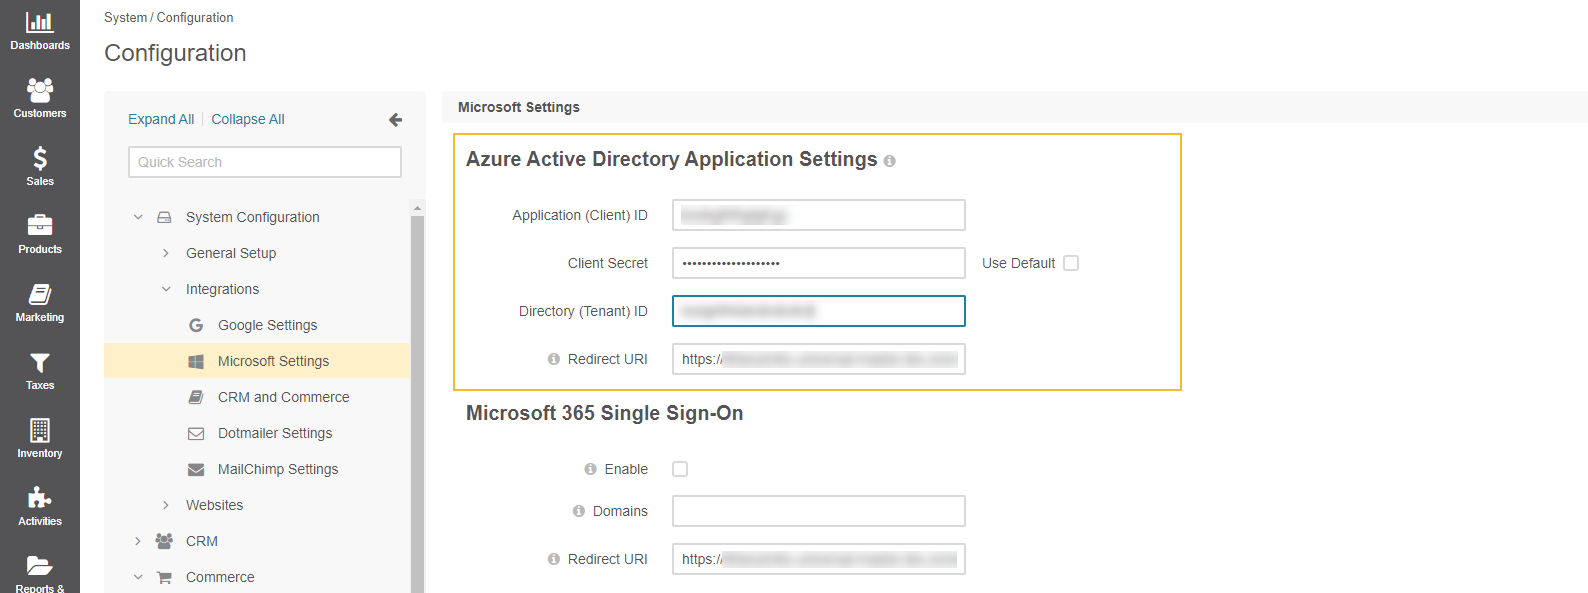 Azure Active Directory Application Settings